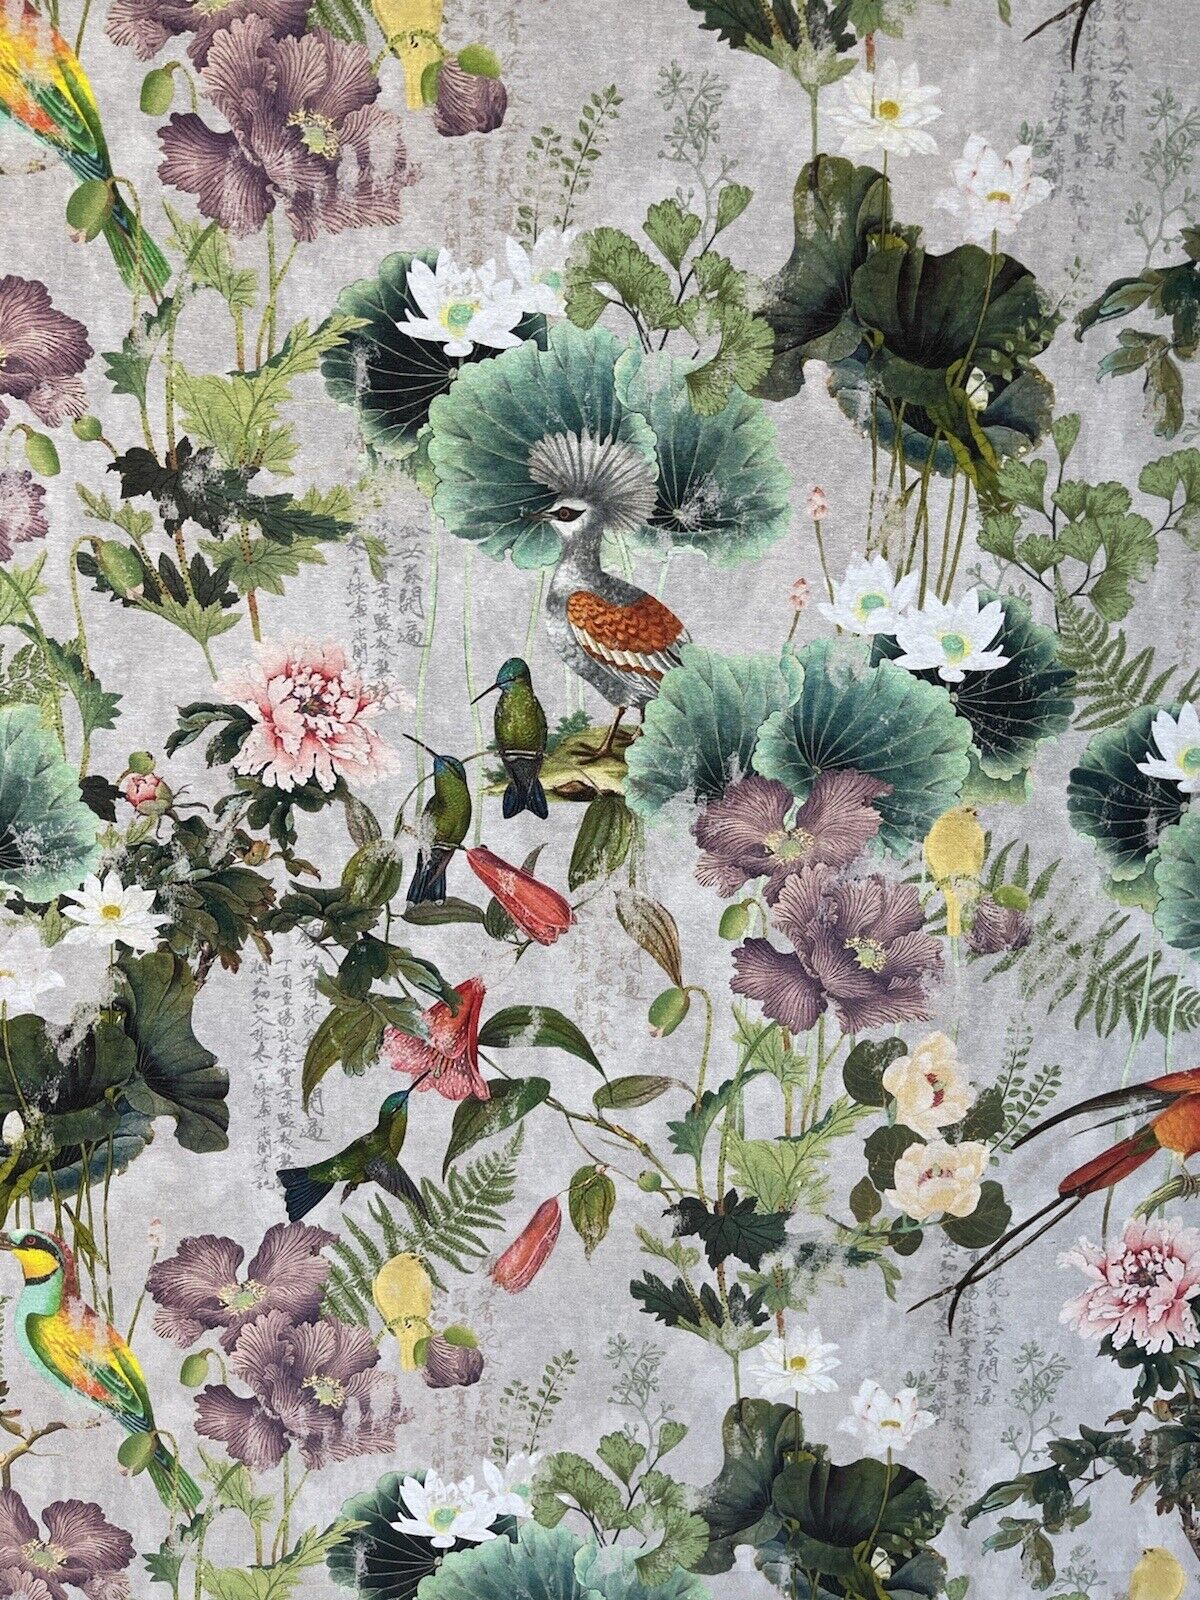 Hummingbirds Printed Cotton Fabric by Meter Paradise Birds Botanical Floral Sewing Material Vintage Grey Cottonn